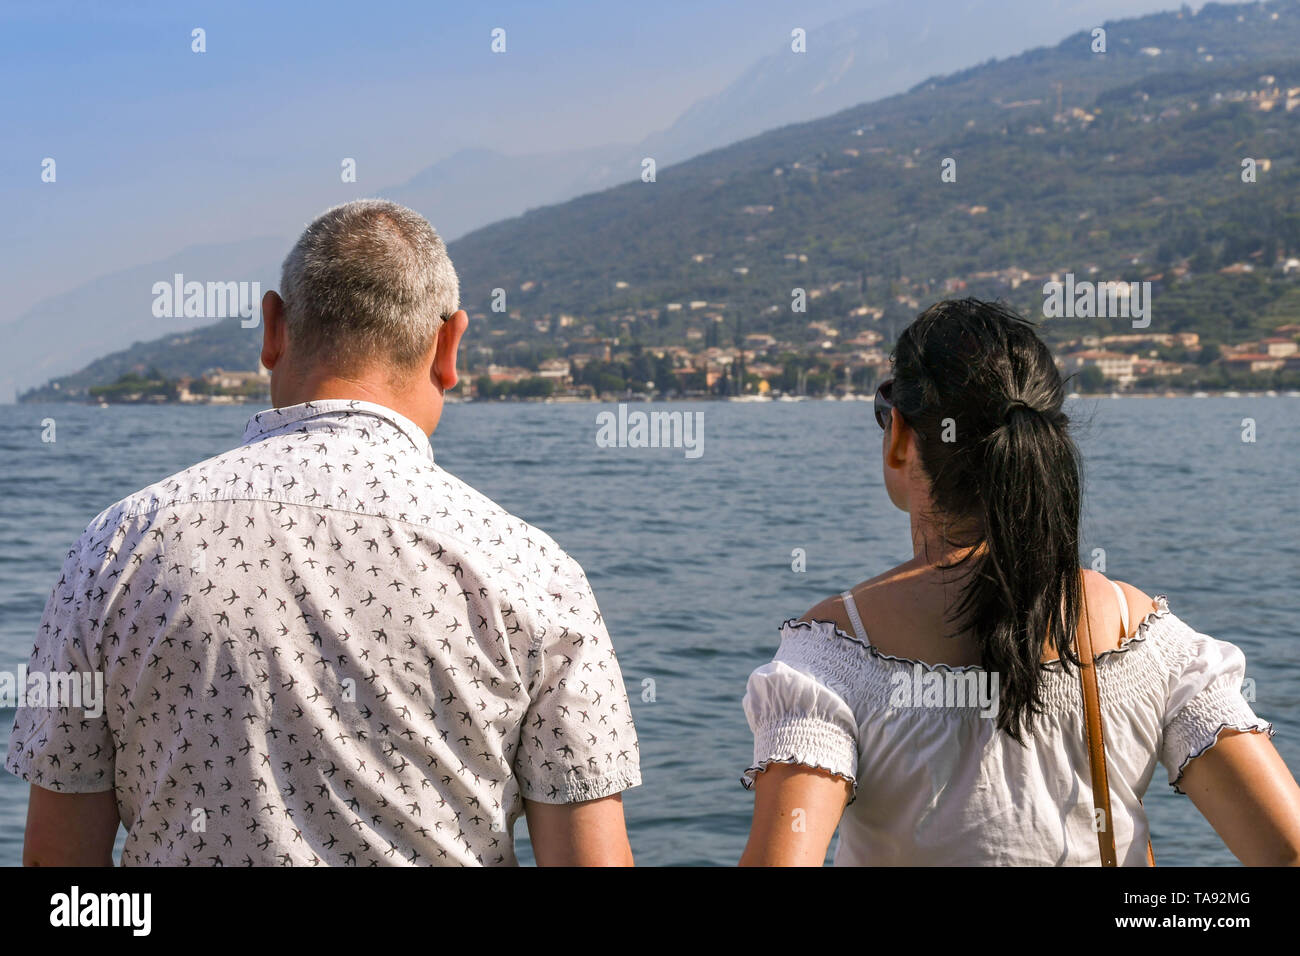 GARDA, LAKE GARDA, ITALY - SEPTEMBER 2018: Two people standing on a  passenger ferry on a journey across Lake Garda looking out at the scenery. Stock Photo